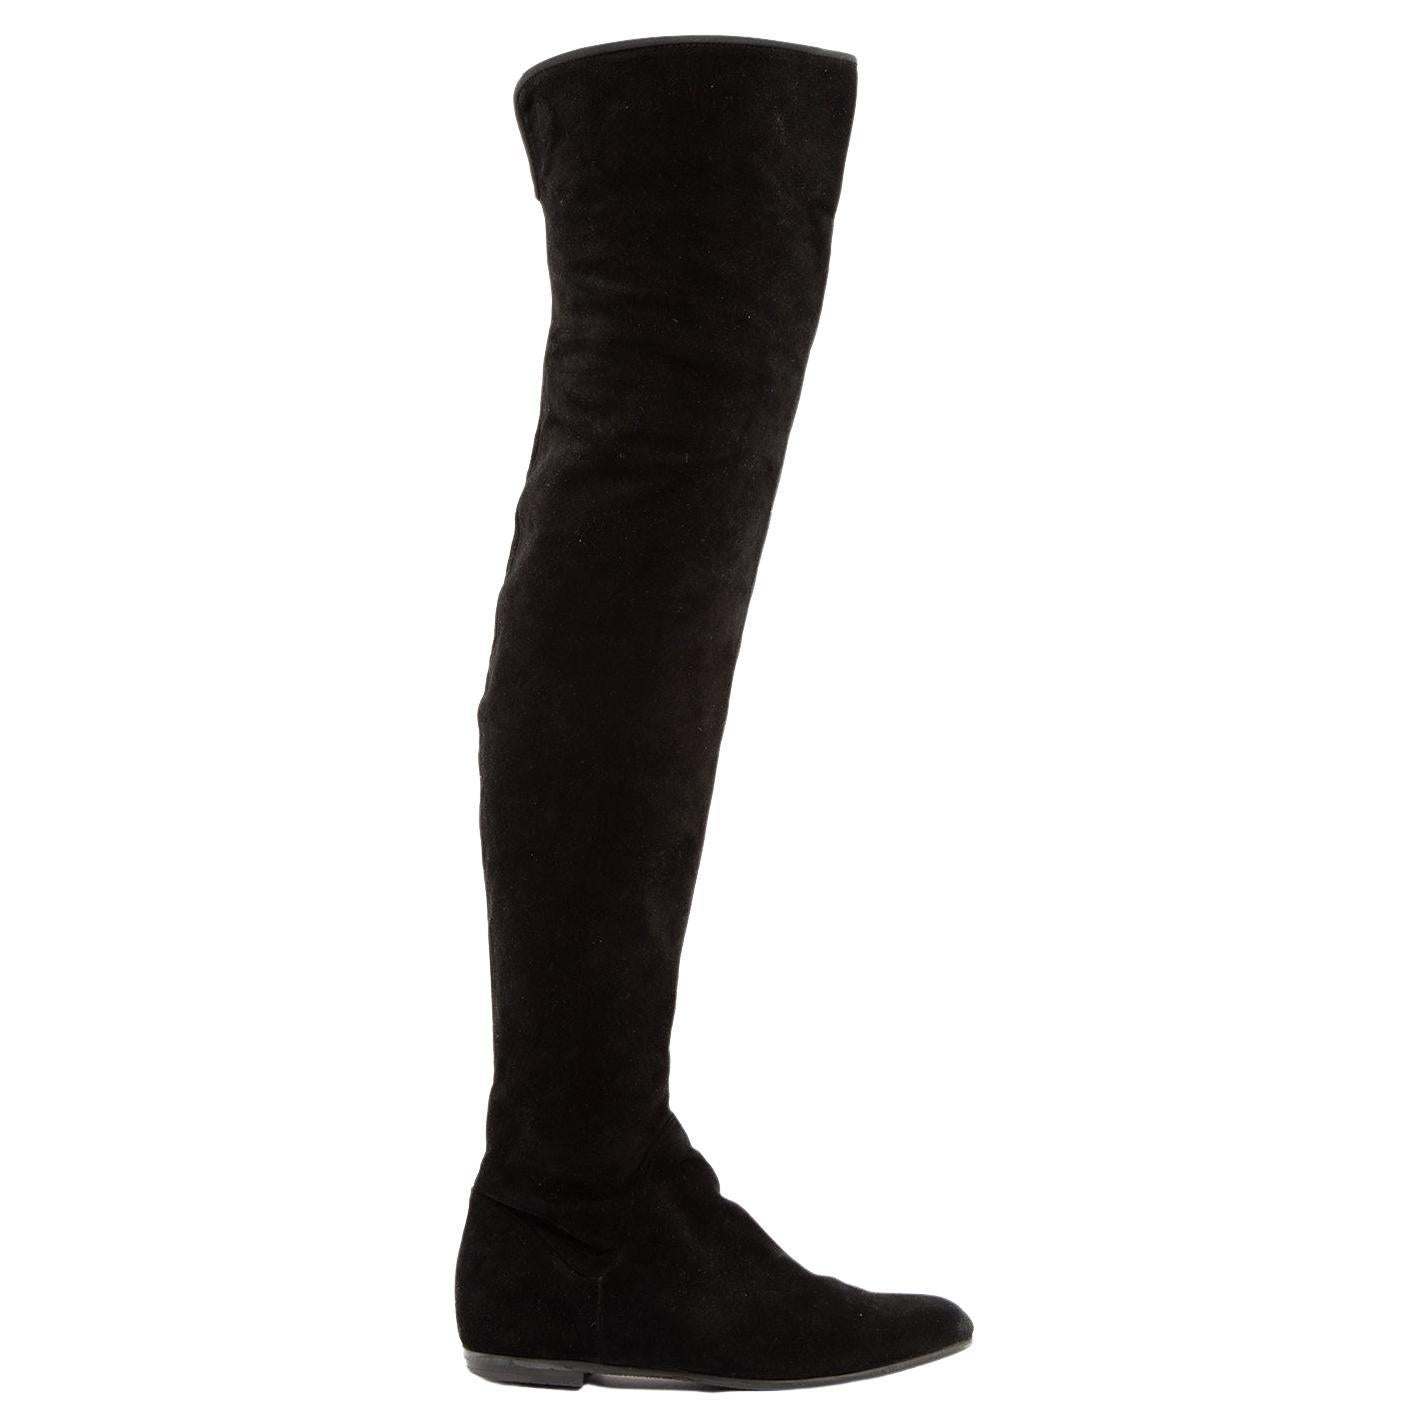 Pre-Loved Giuseppe Zanotti Women's Black Over the Knee Suede Boots For Sale